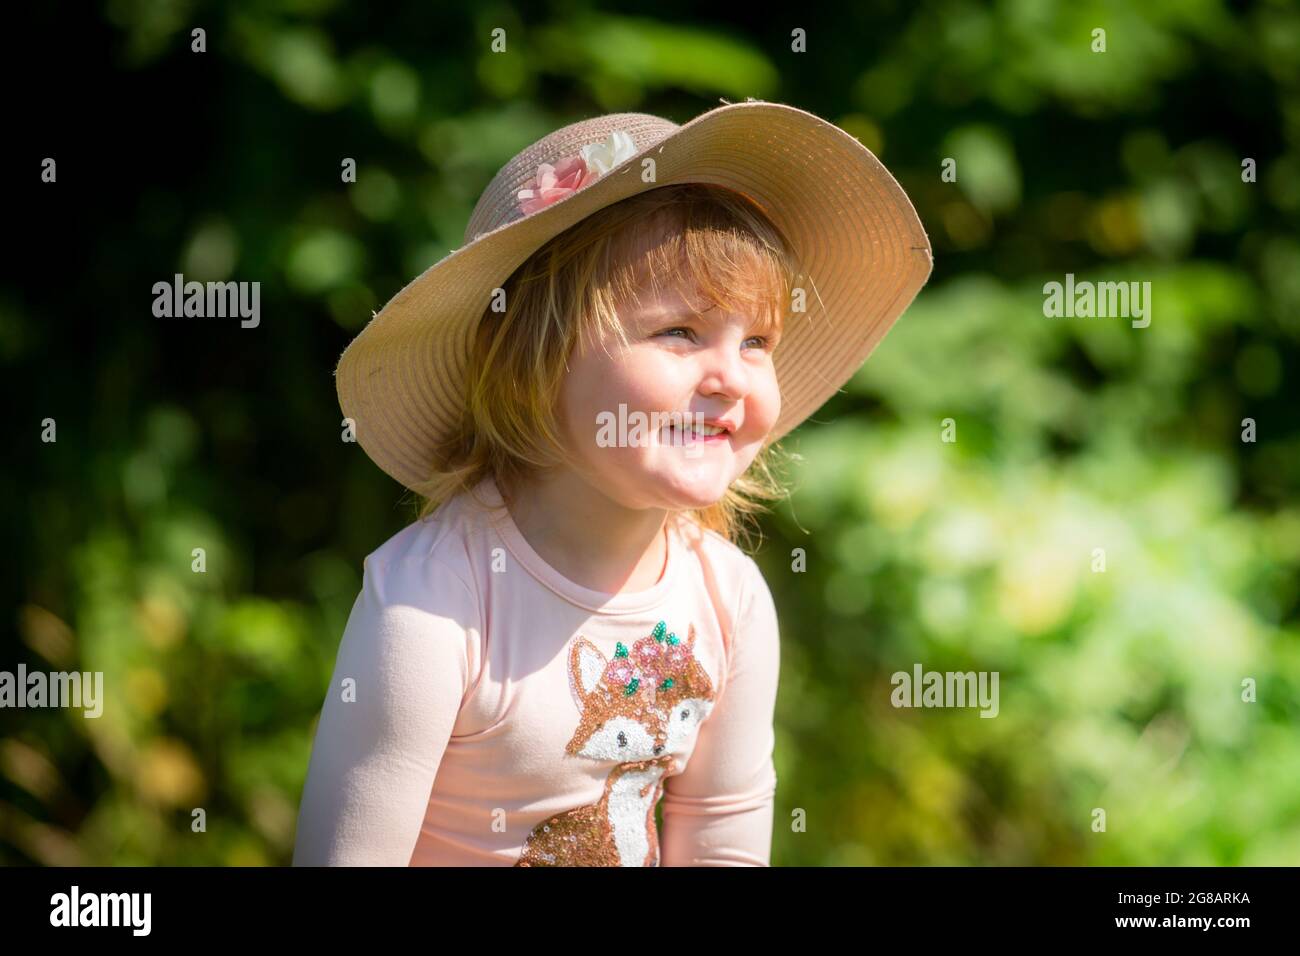 Two year old white girl close up wearing a hat and smiling Stock Photo